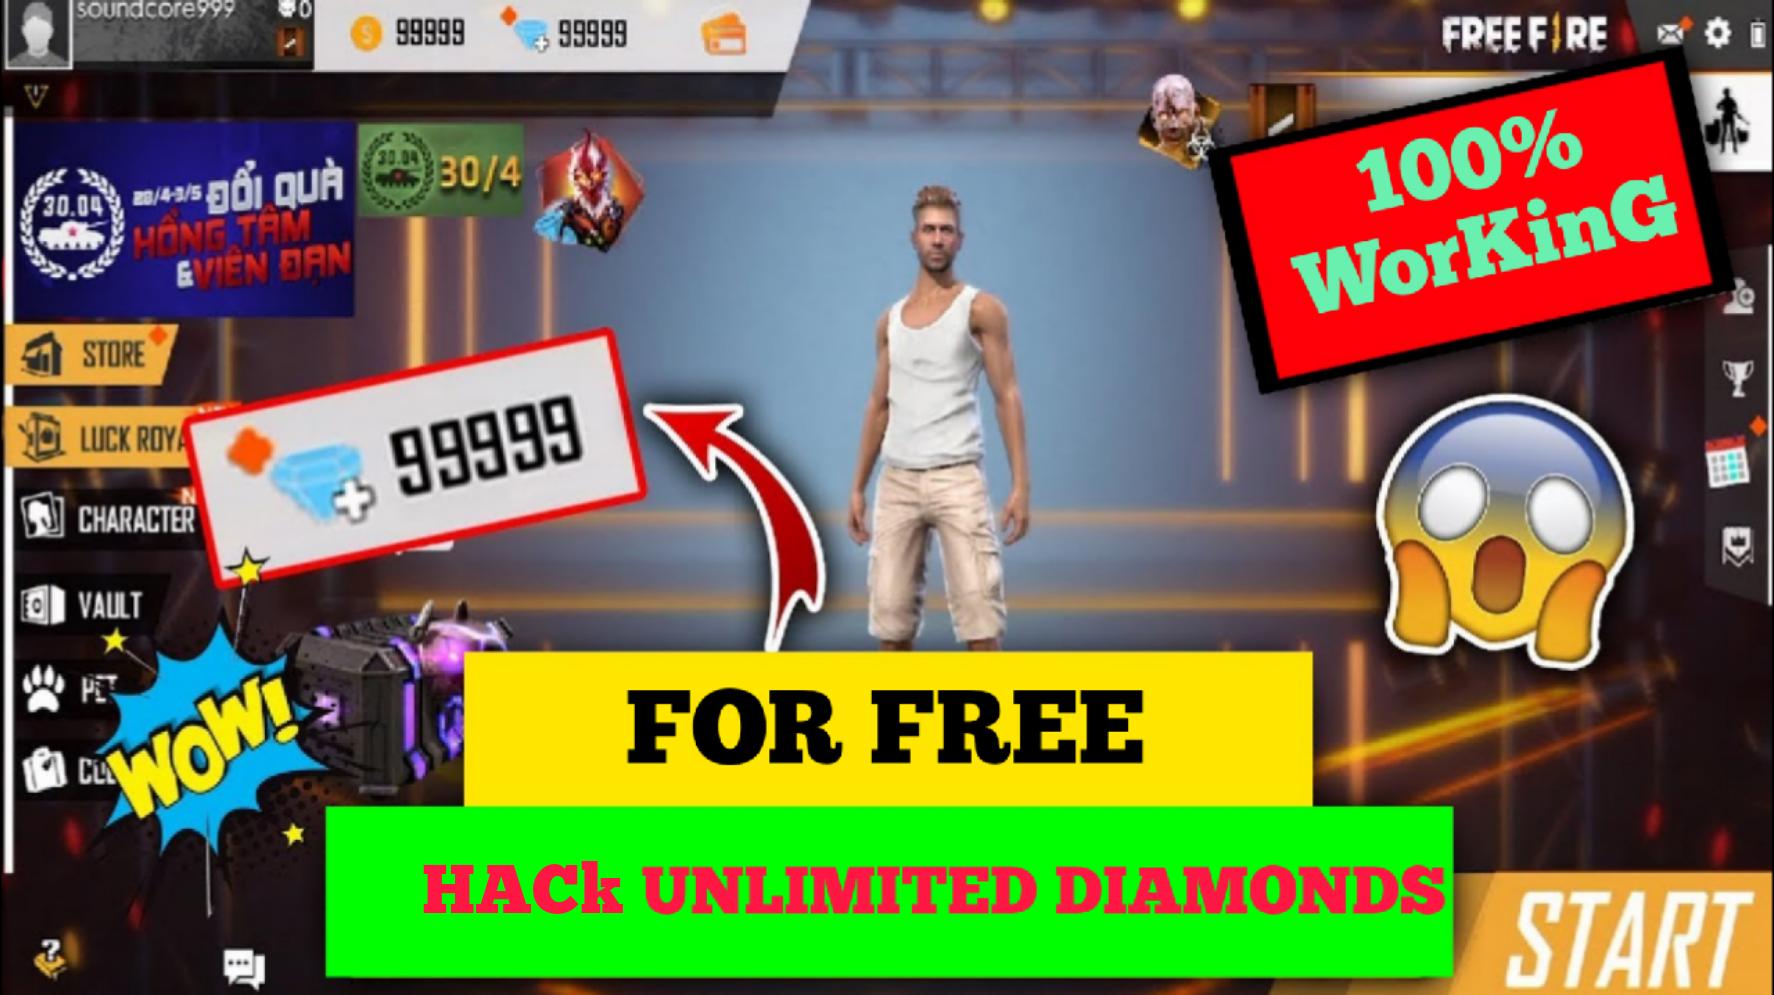 New Guide For Free Fire Pro Tips 2020 For Android Apk Download